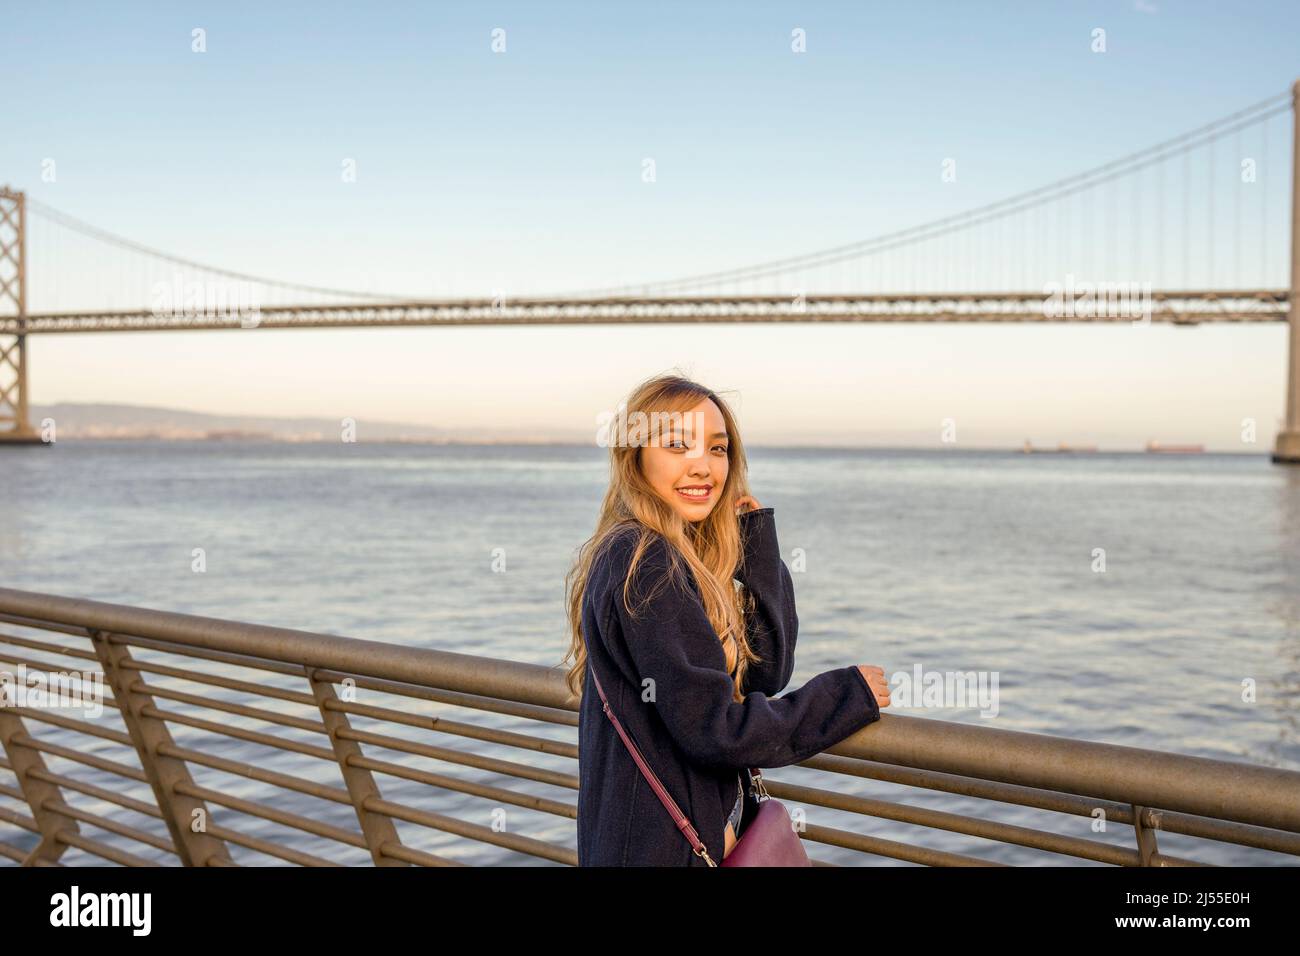 Late Afternoon Half Body Portraits of Young Woman with Oakland Bay Bridge and San Francisco Bay in the Background | Lifestyle Travel To the City Stock Photo